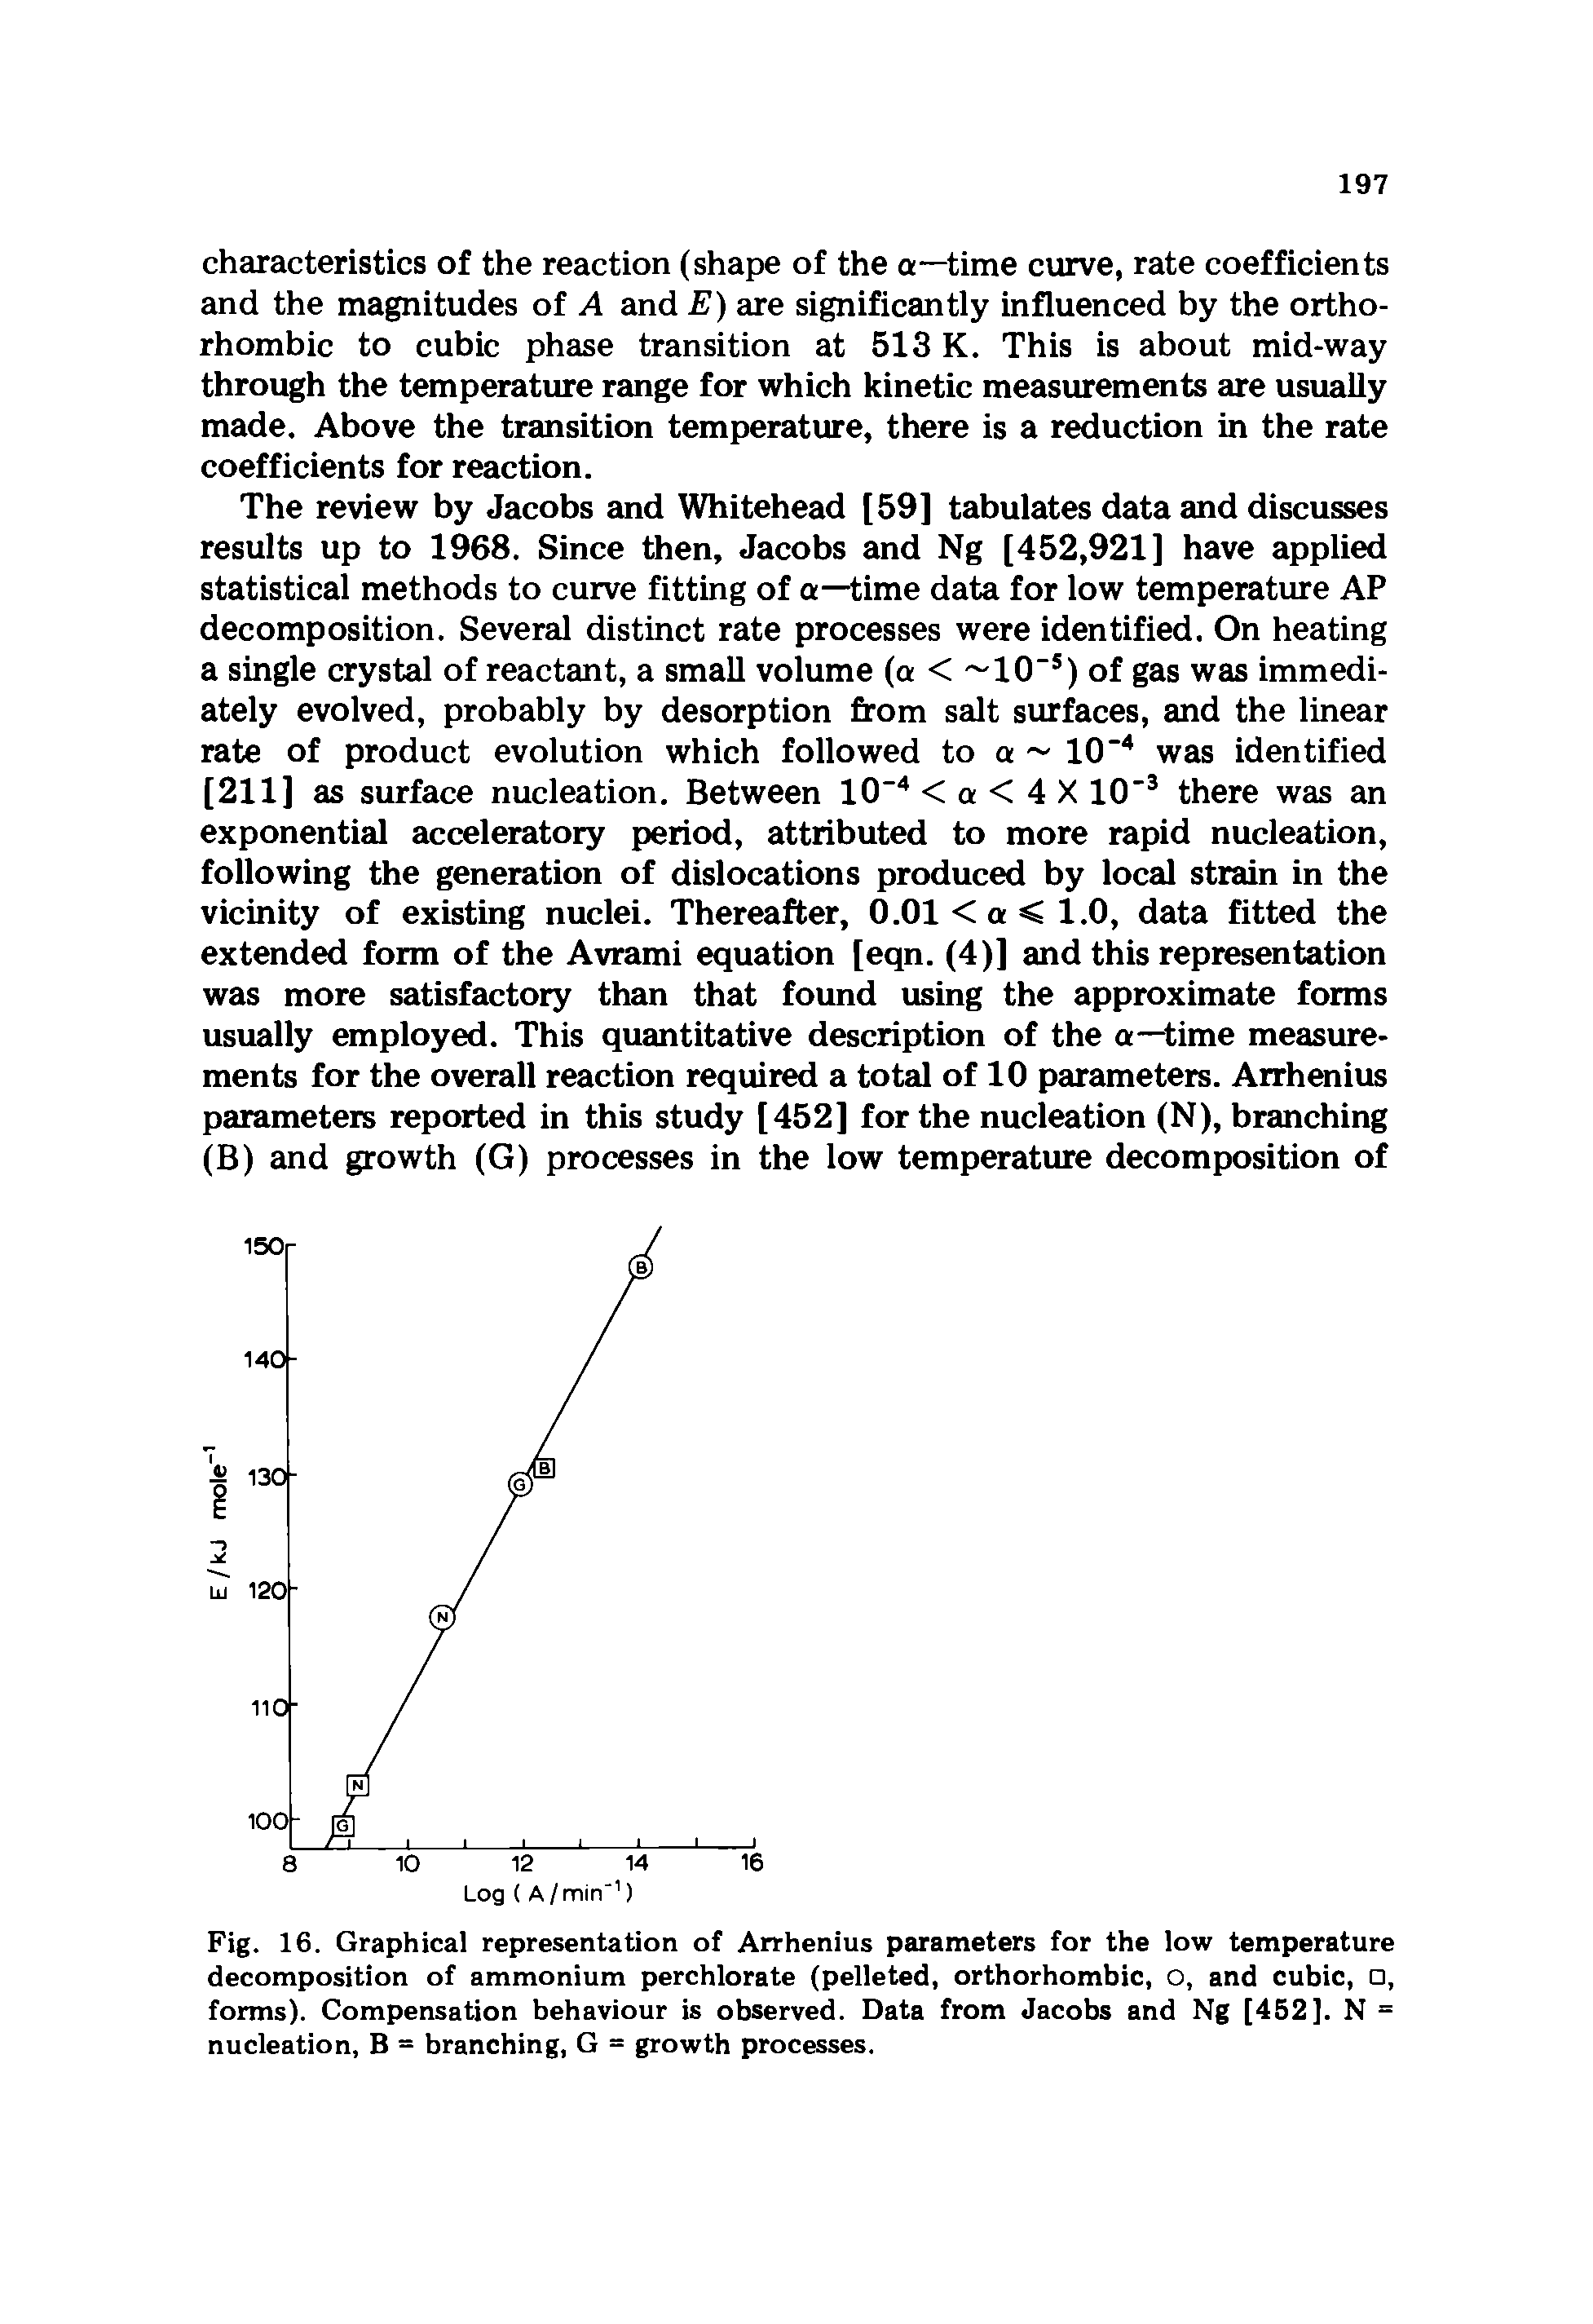 Fig. 16. Graphical representation of Arrhenius parameters for the low temperature decomposition of ammonium perchlorate (pelleted, orthorhombic, o, and cubic, , forms). Compensation behaviour is observed. Data from Jacobs and Ng [452]. N = nucleation, B = branching, G = growth processes.